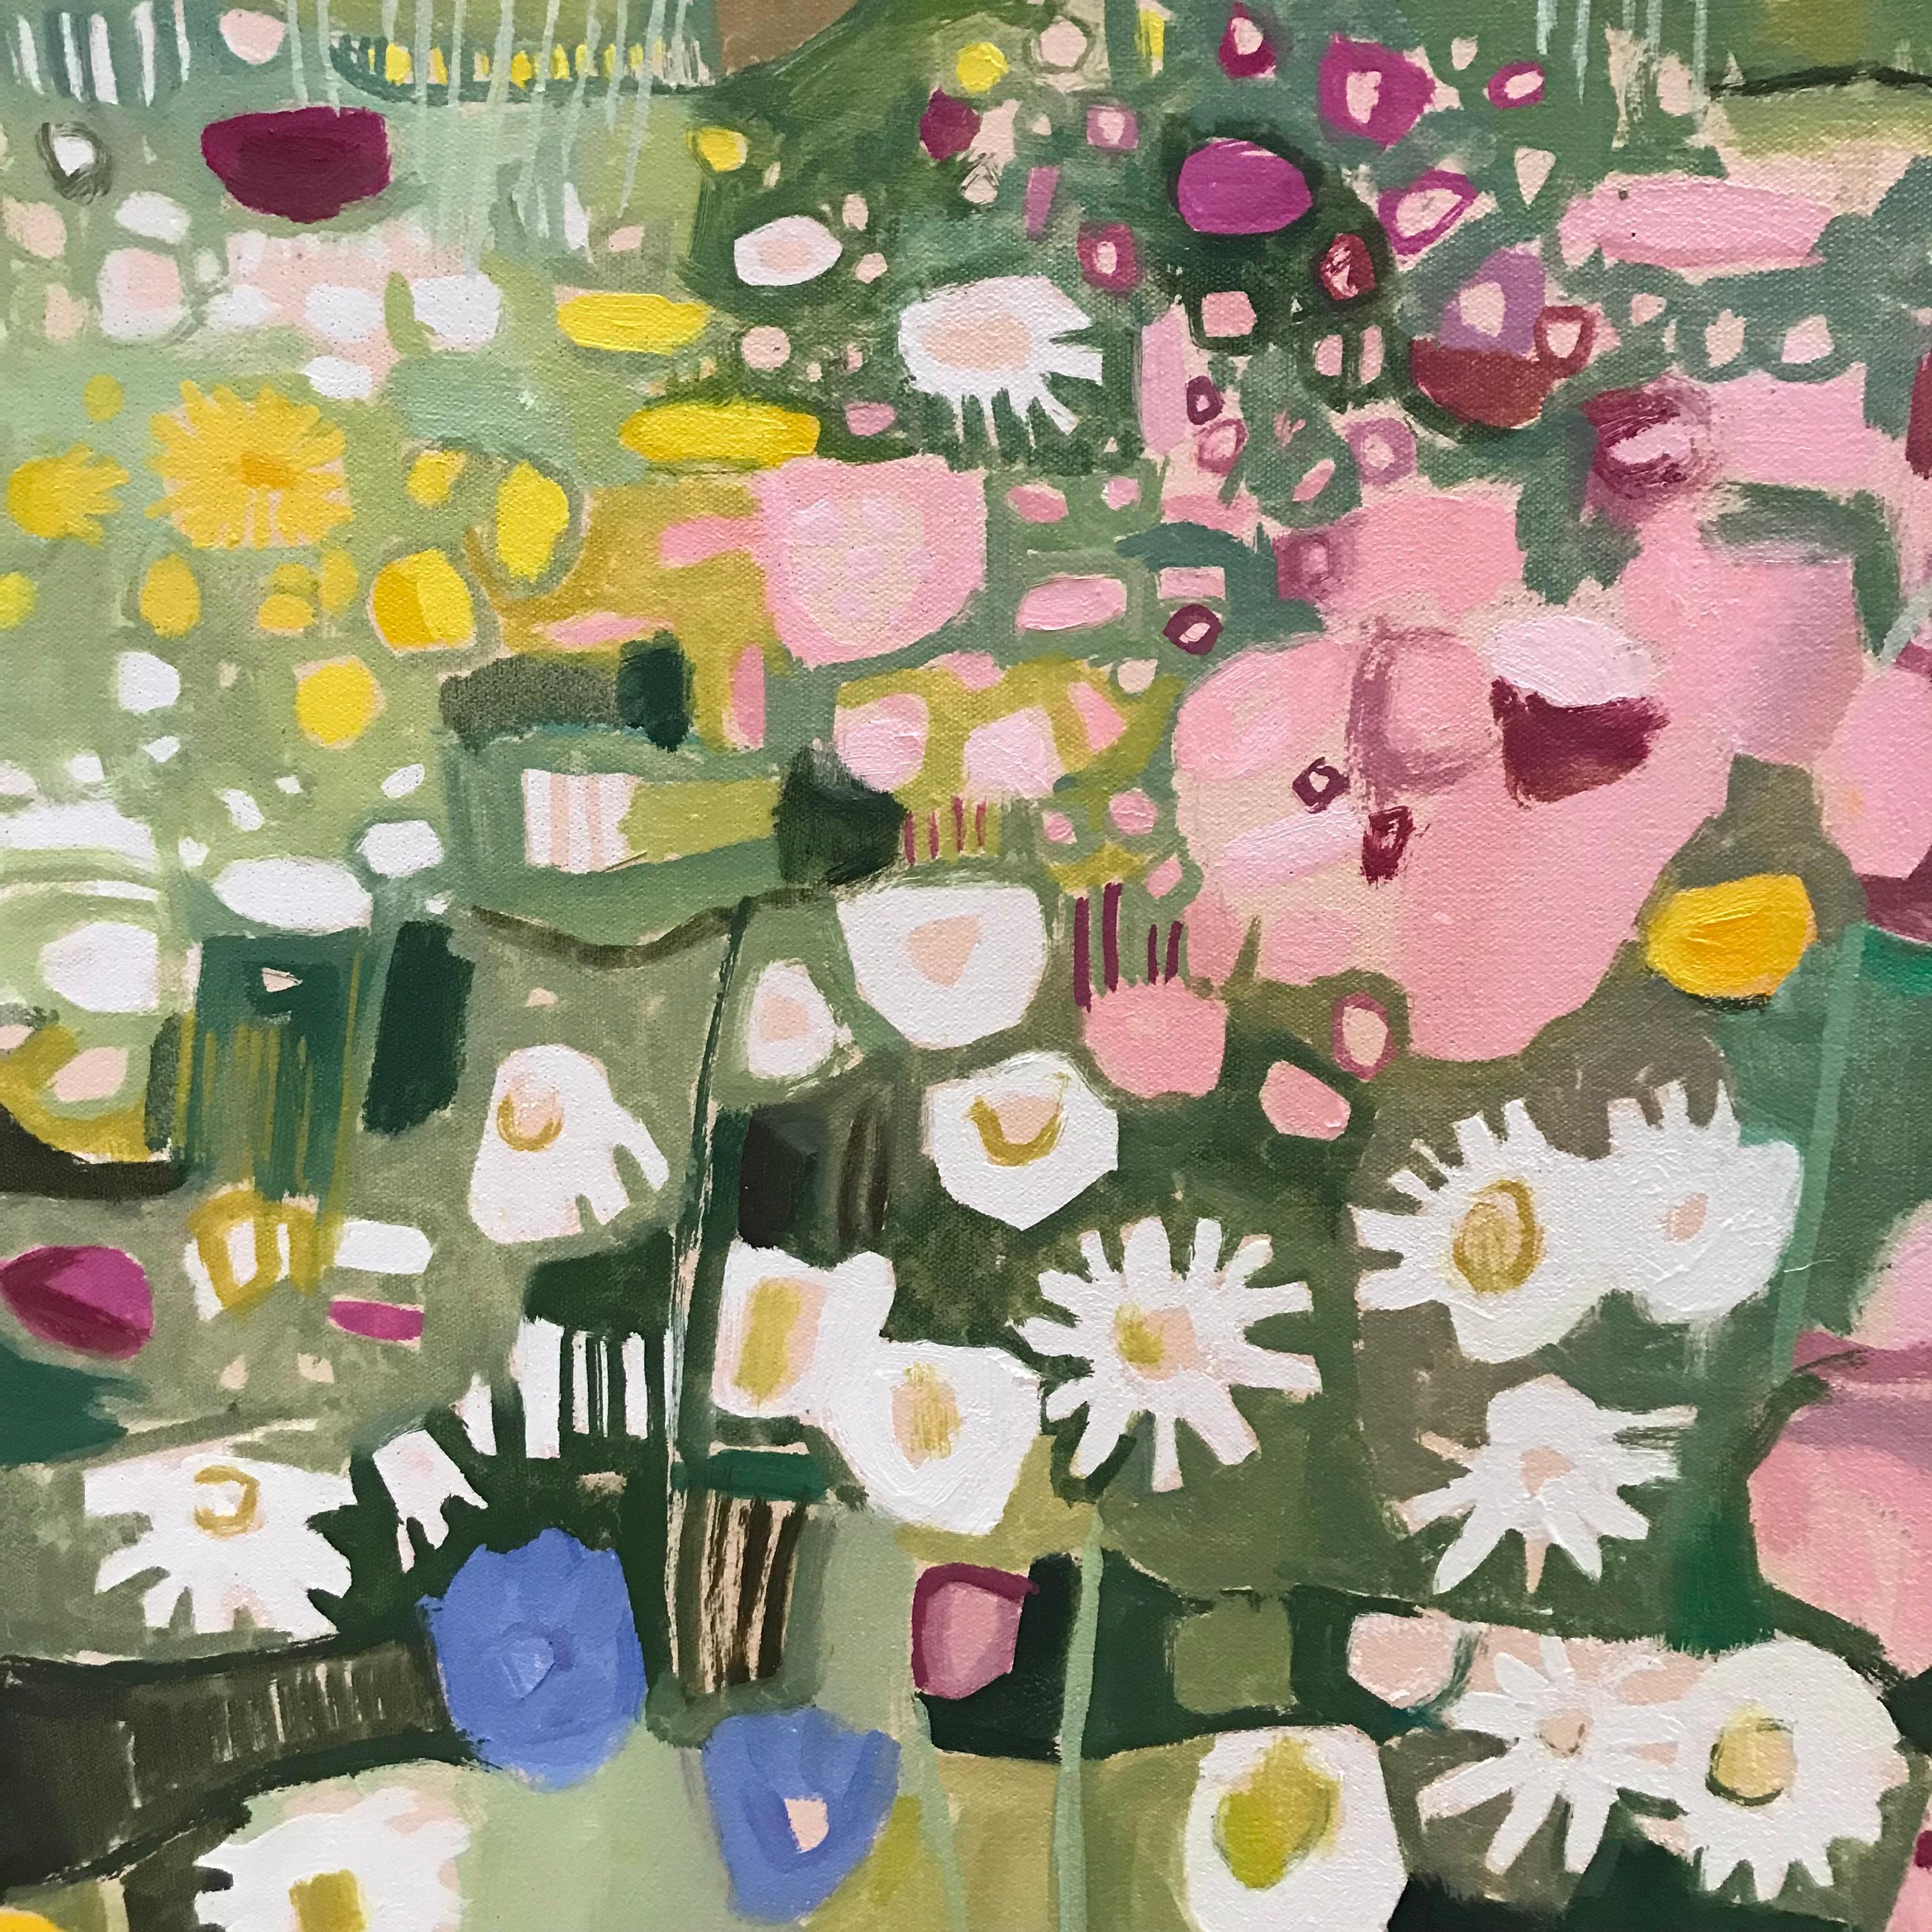 This is the artist's garden in front of her studio, which has been sown with wildflower seeds indigenous to the Cotswolds, but there's a few other random species that have sneaked in there too. Mainly it's a riot of pink oregano, white and yellow